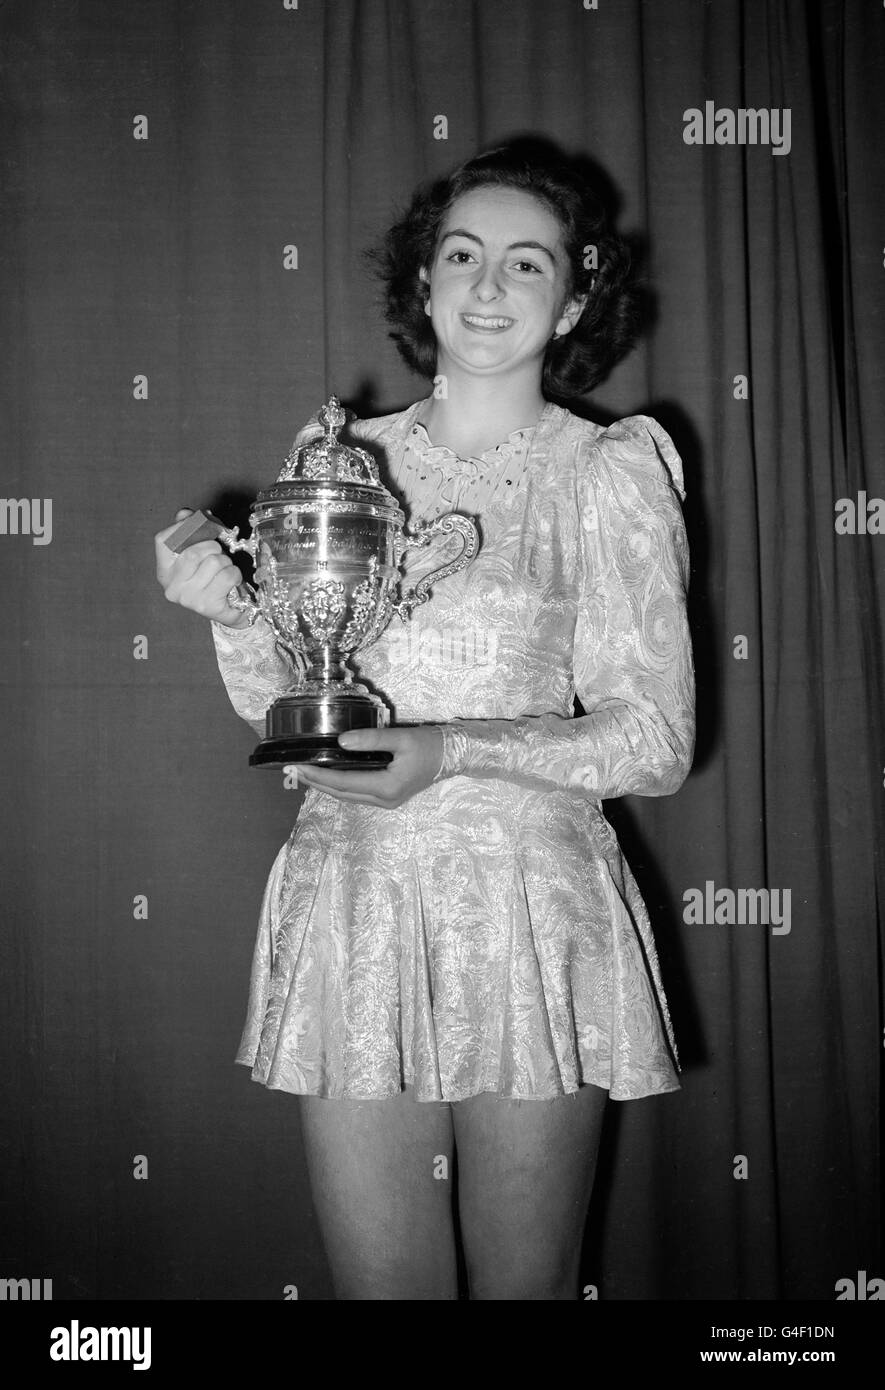 Jeanette Altwegg poses with the trophy after winning the British Amateur Ice Figure Skating Championship at Wembley Stock Photo